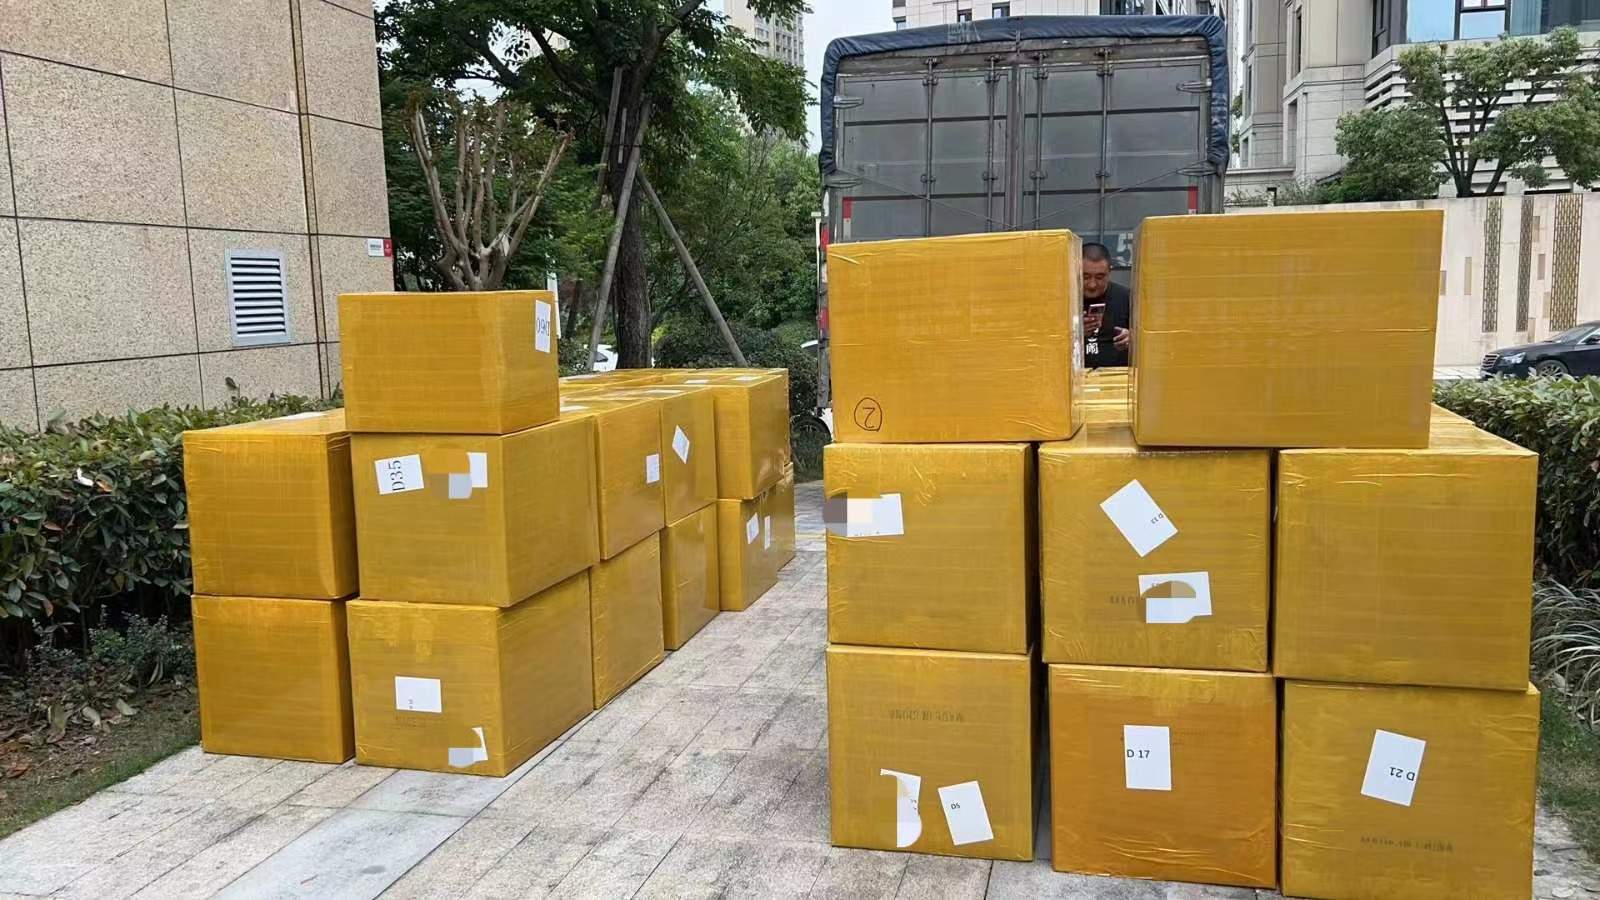 Real time photos of lace product shipment site